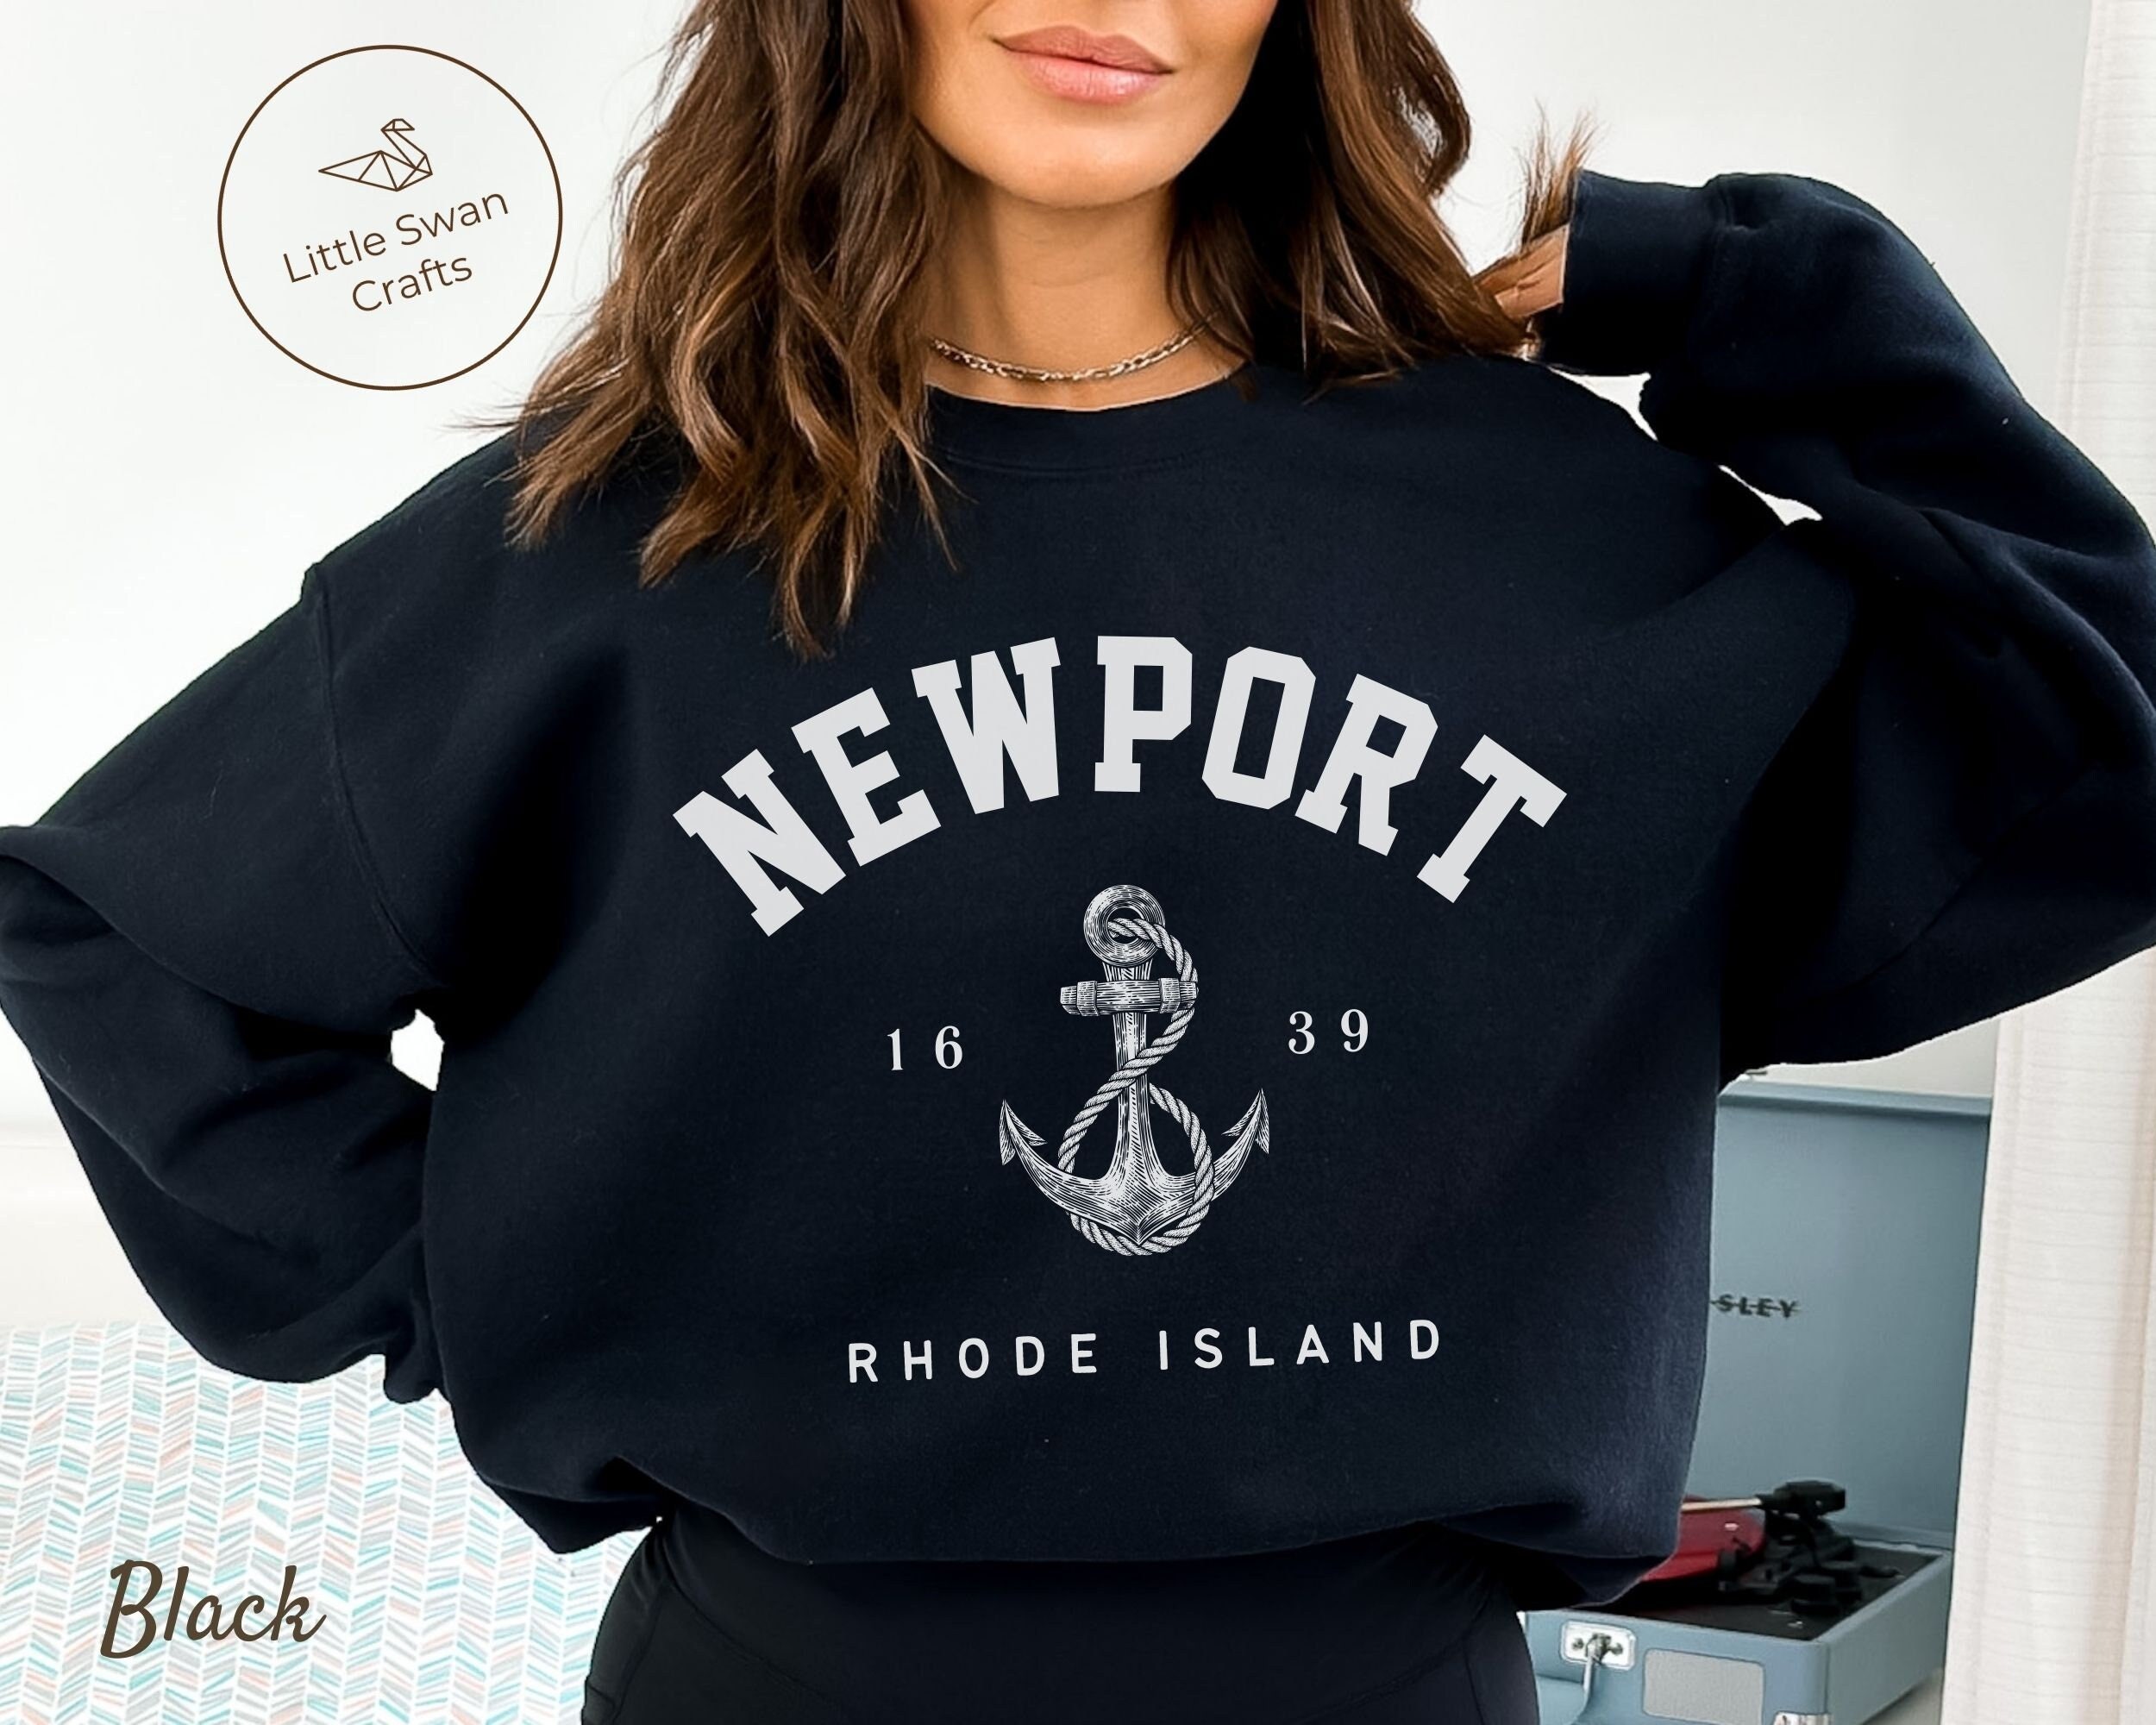 Newport Crewneck Sweater - Made in USA - Merrow Knits - USA made Knit  Products